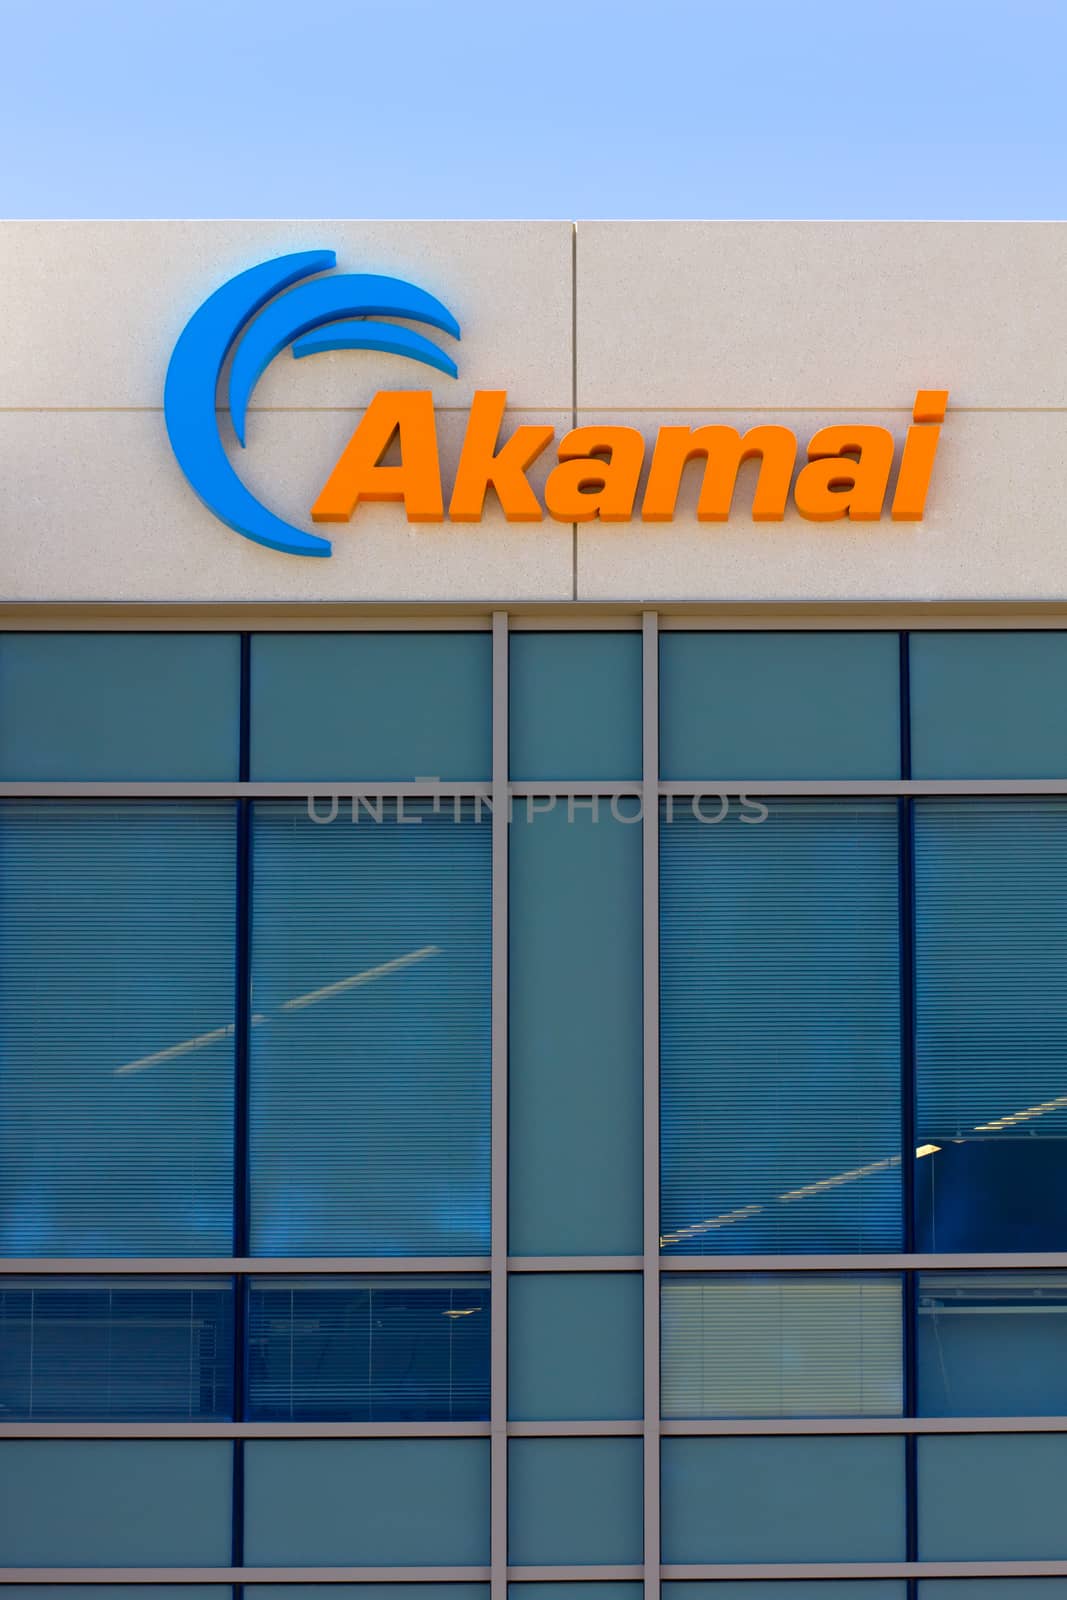 SANTA CLARA,CA/USA - MAY 11, 2014: Akamai building in Silicon Valley. Akamai is an Internet content delivery network and a distributed-computing platform.